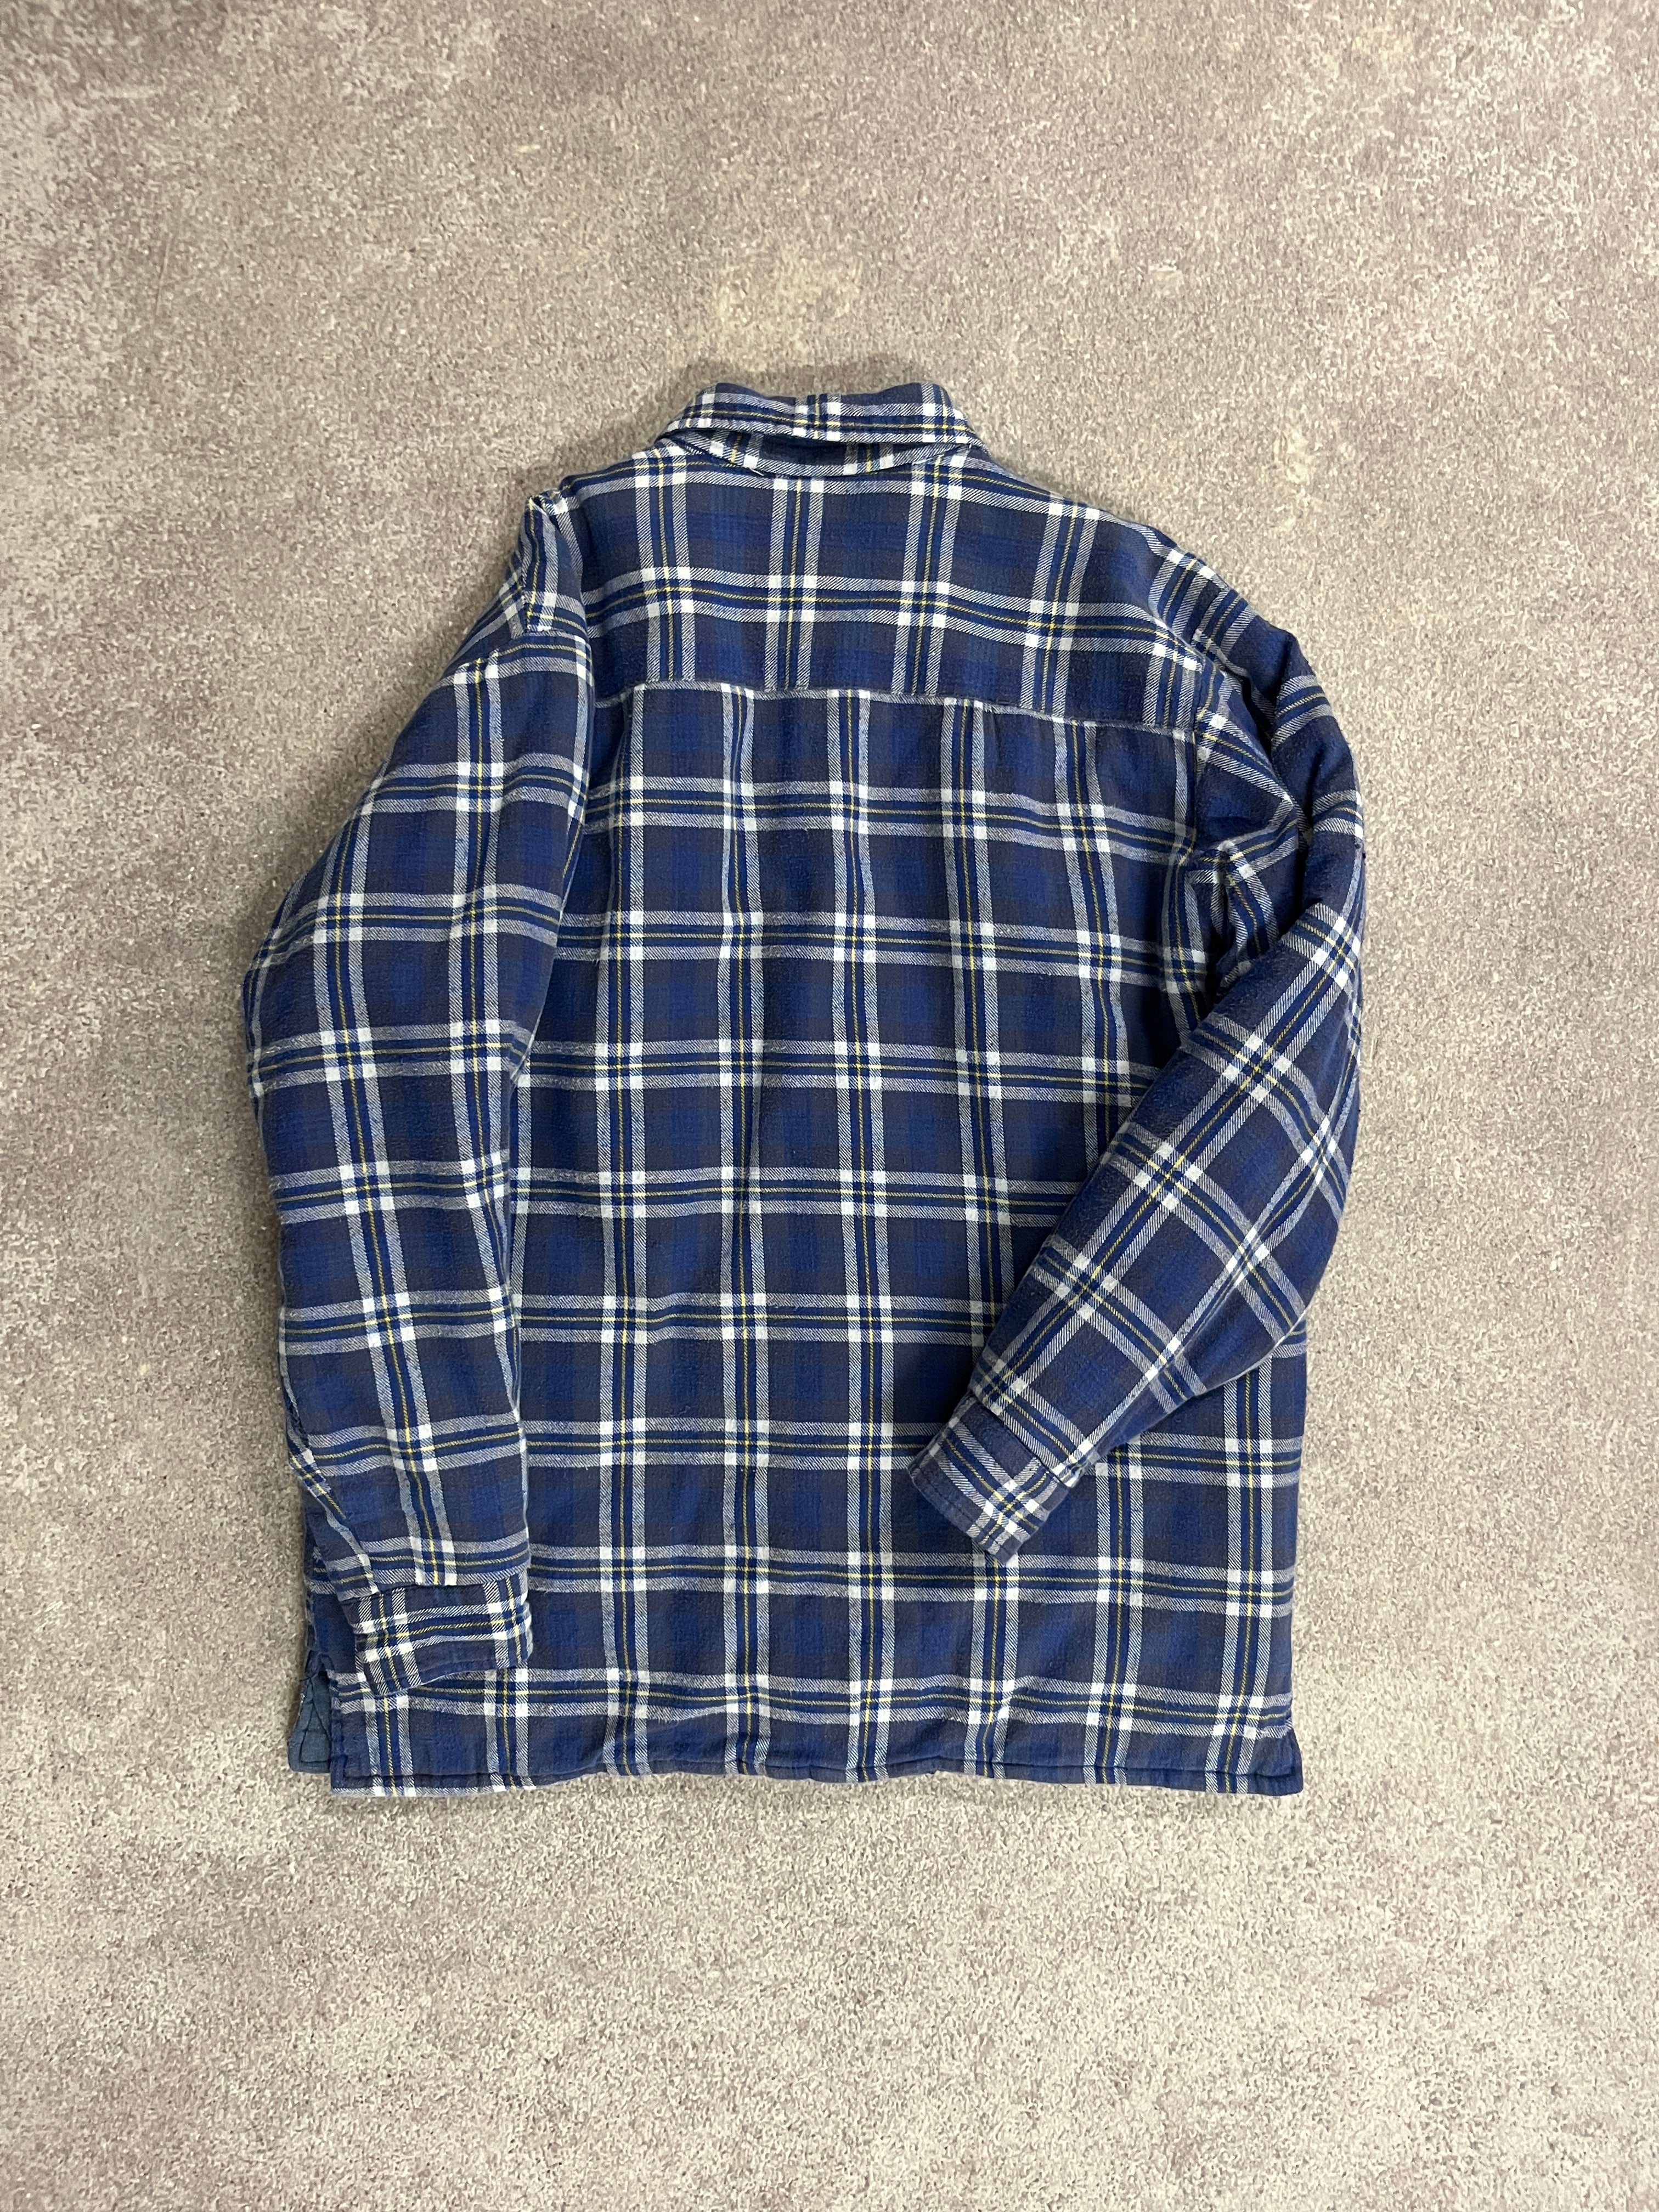 Vintage Lined Shirt Blue // X-Small - RHAGHOUSE VINTAGE